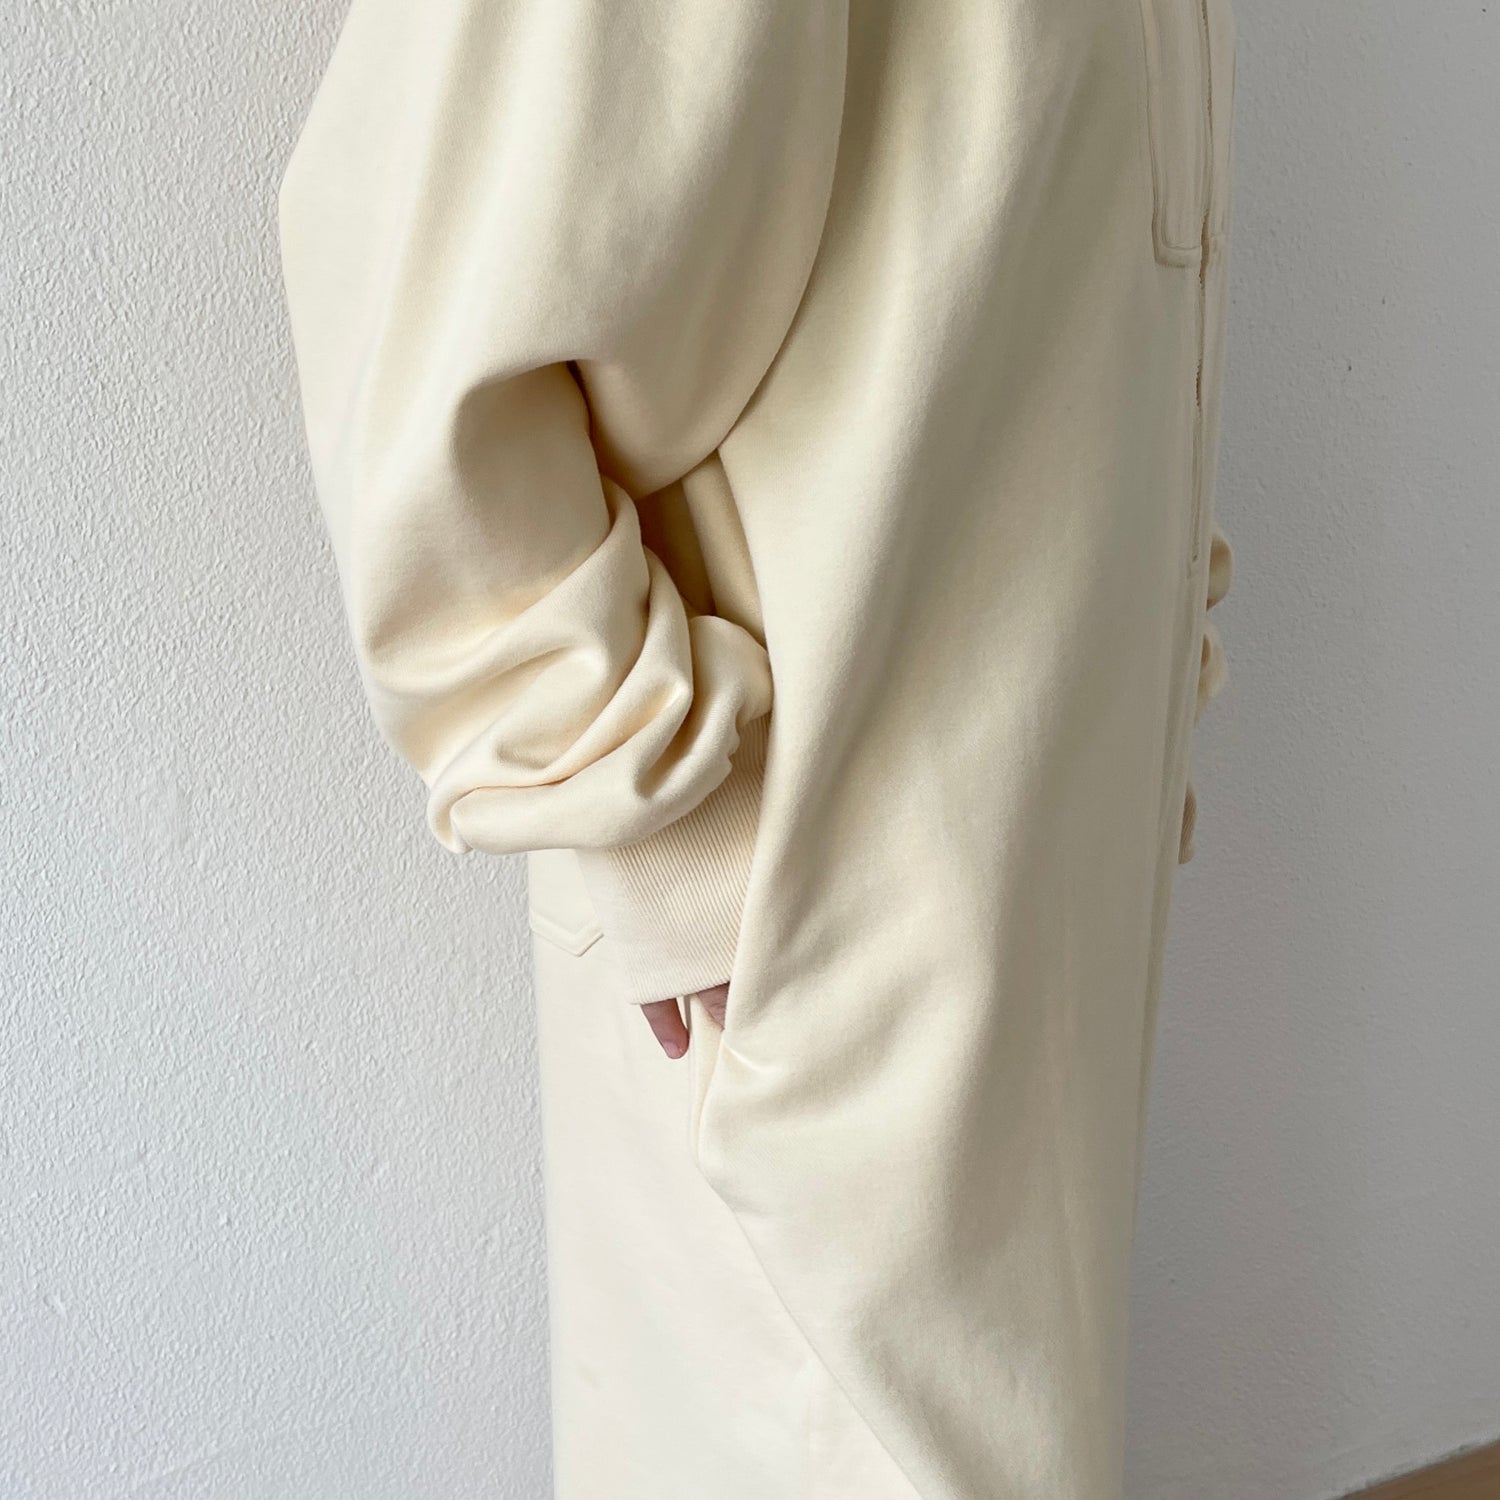 high neck half zip up sweat all in one / ivory （ハイネックハーフ 